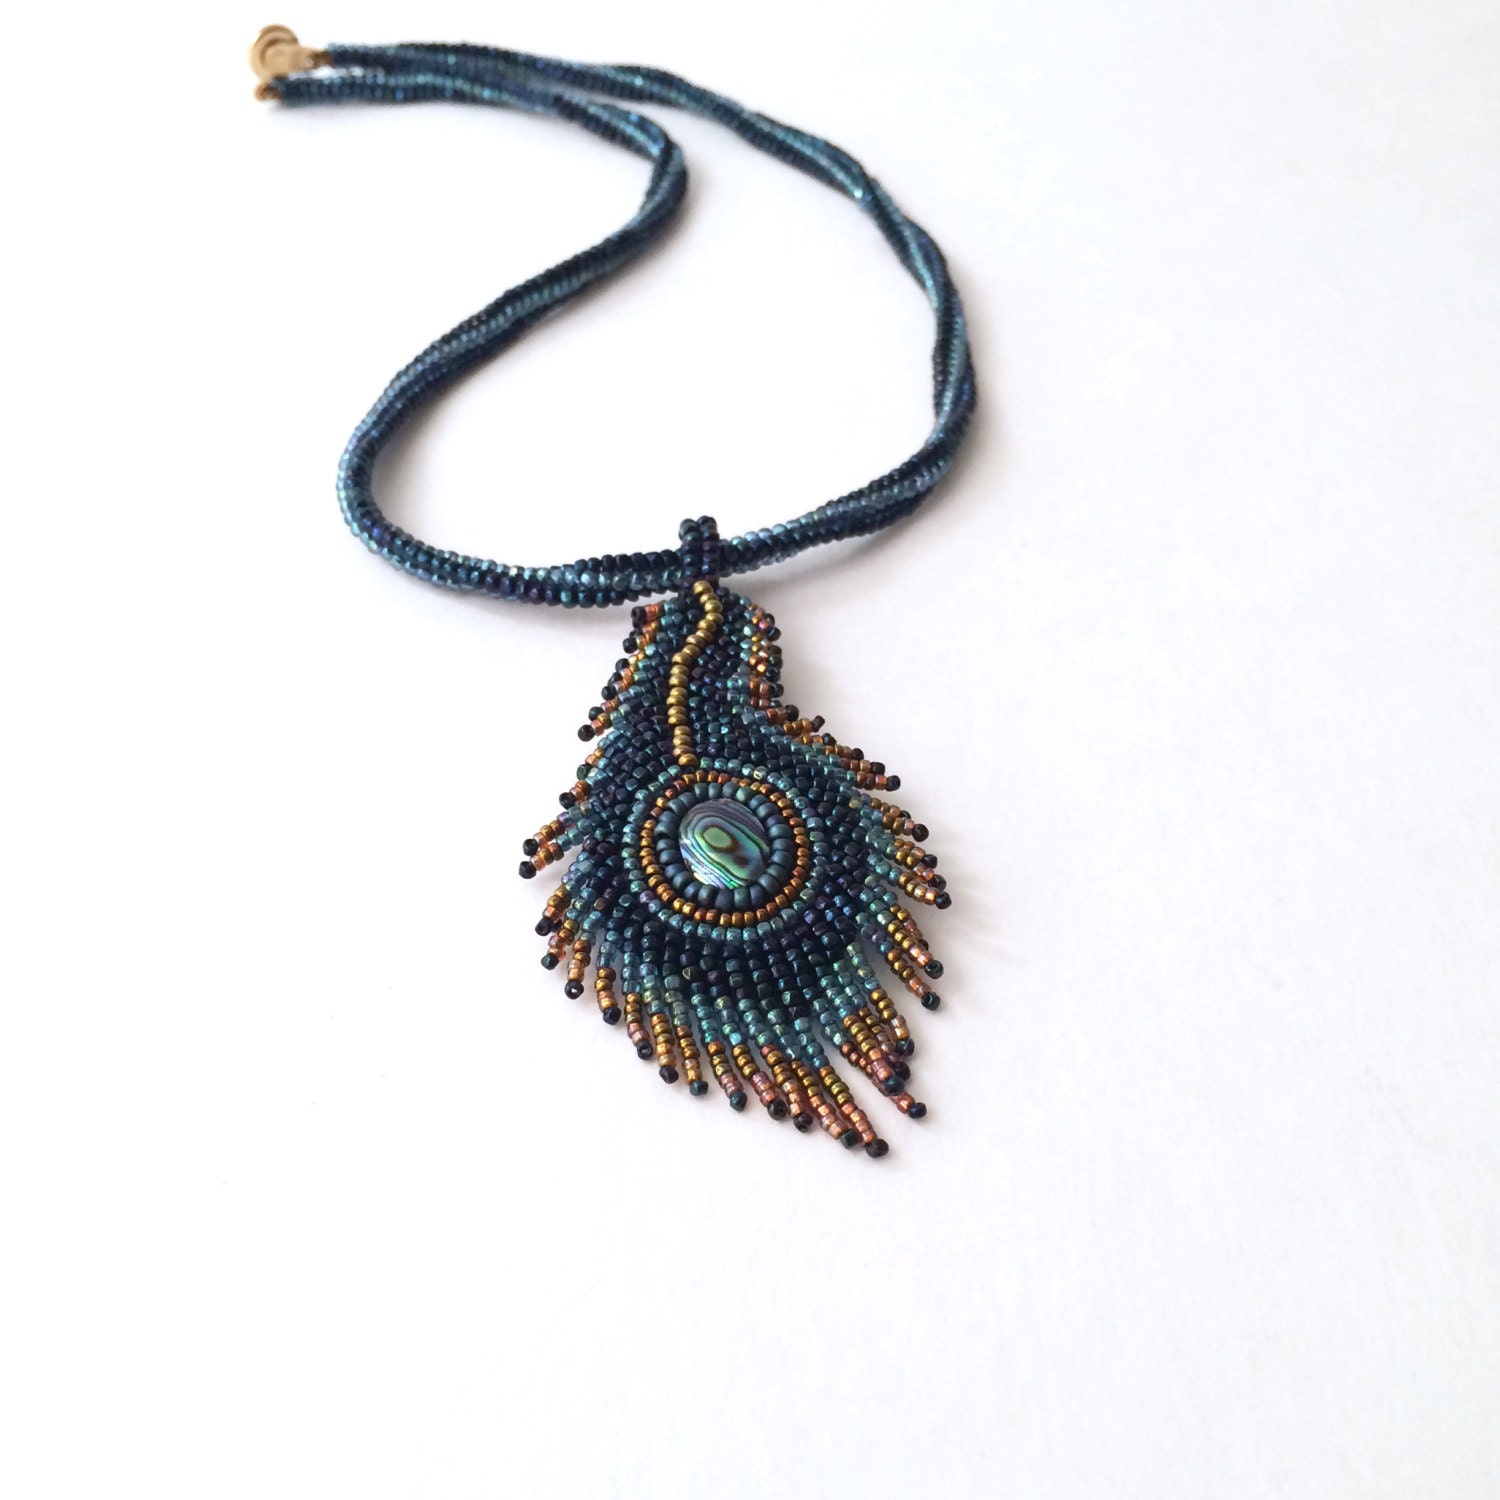 Peacock feather bead embroidery necklace with paua cabochon